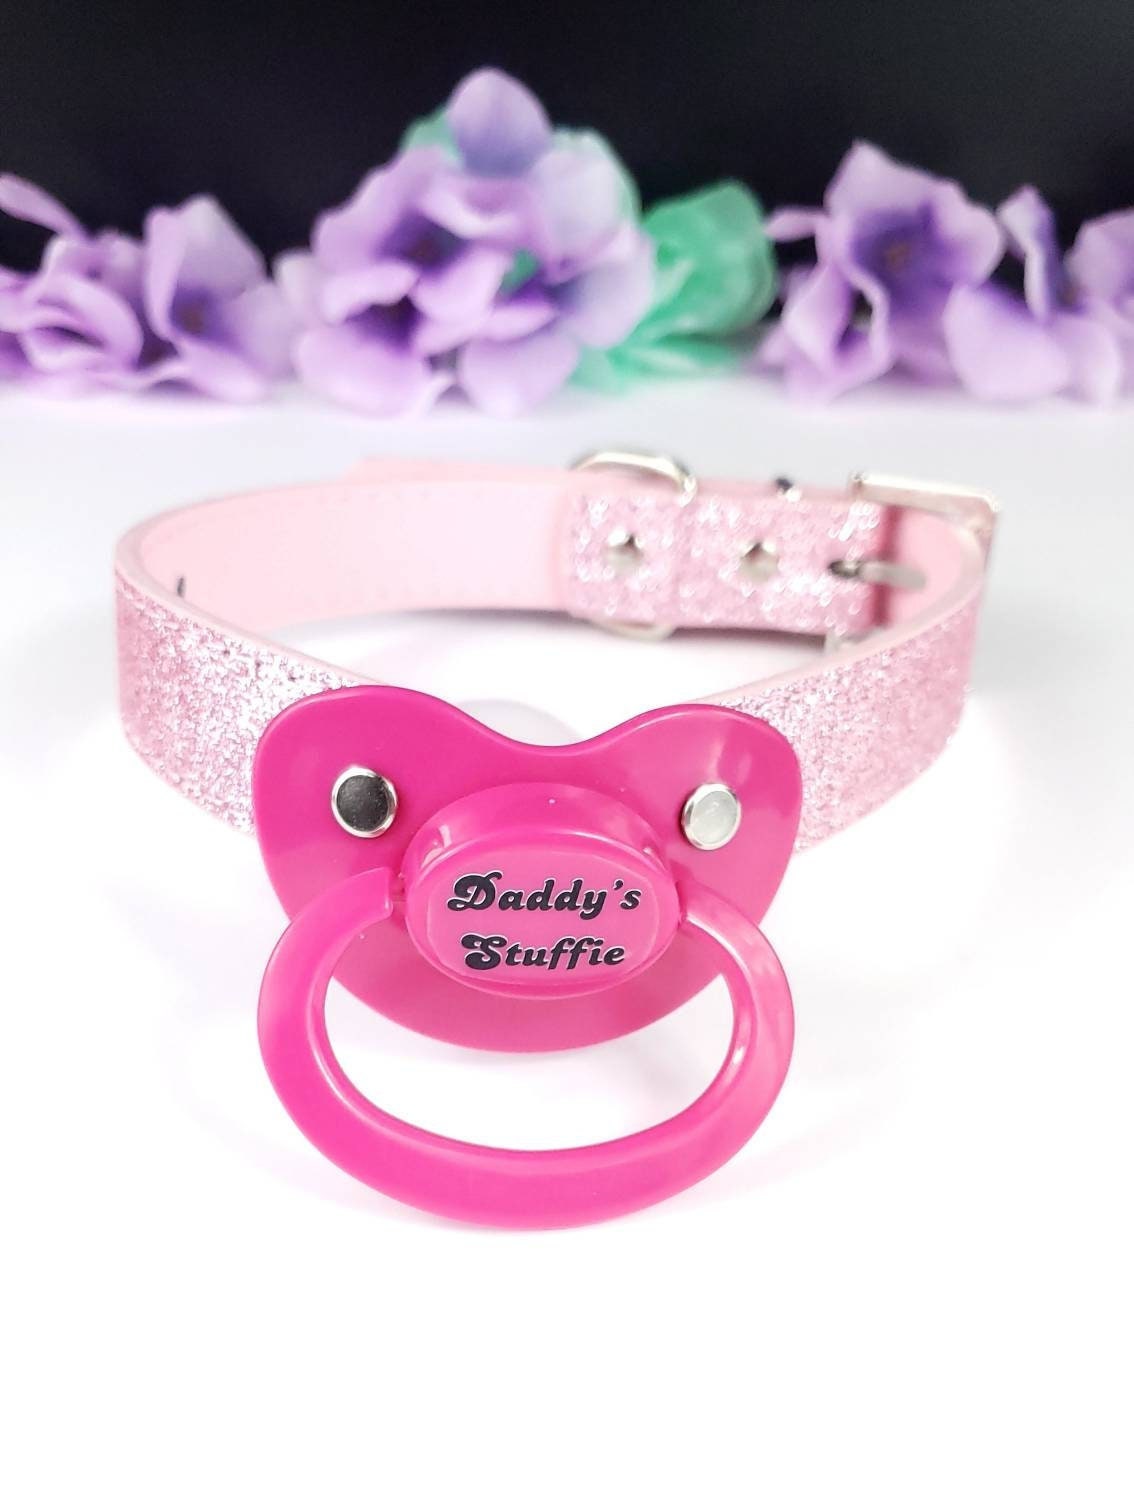 Daddy's Stuffie Adult Pacifier Gag